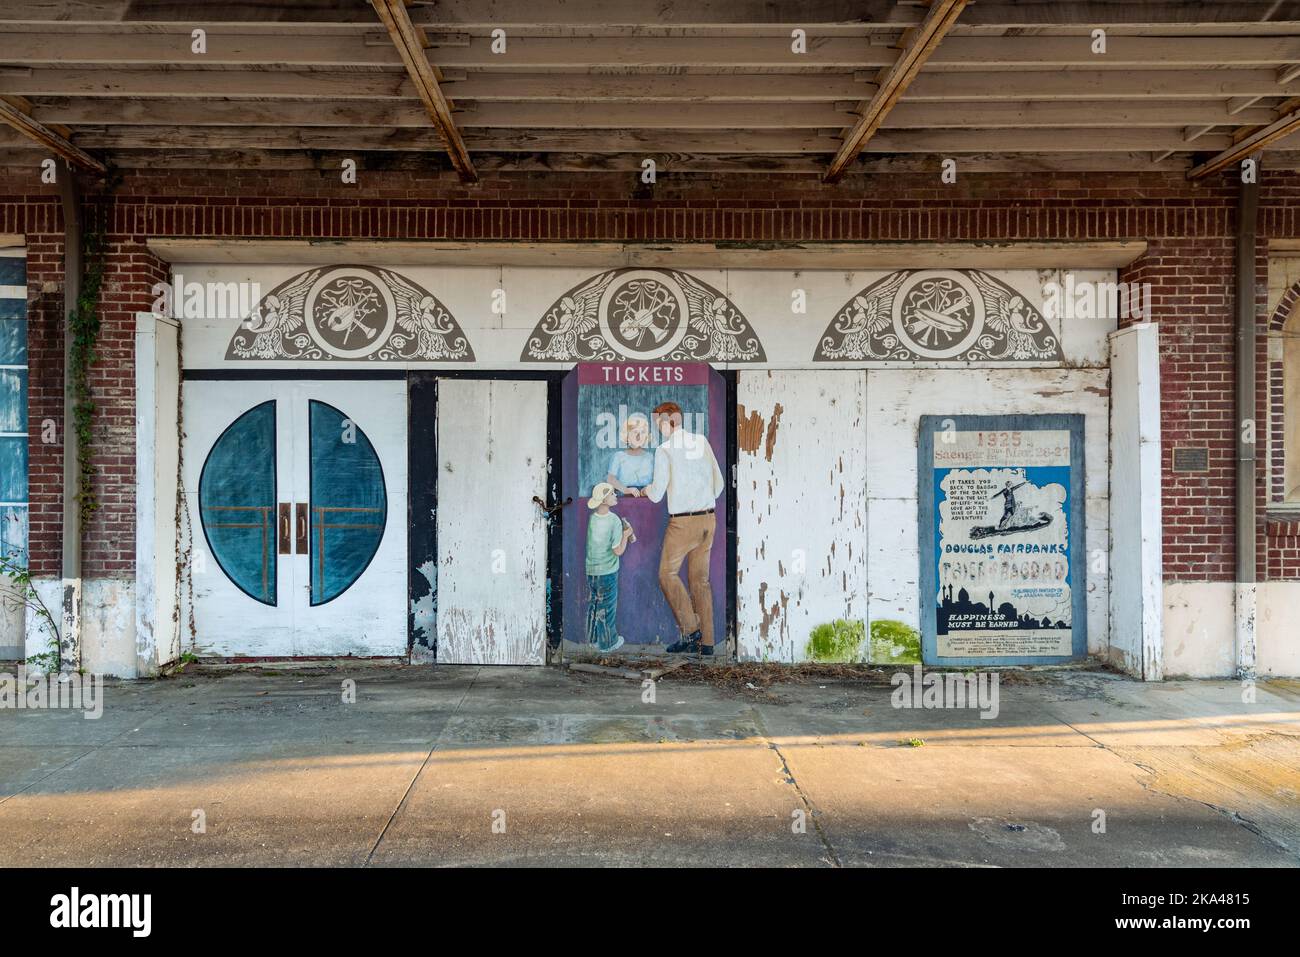 Mural painted on the exterior wall of the abandoned Saenger Theater, built in 1924 and closed in the 1970s. Stock Photo